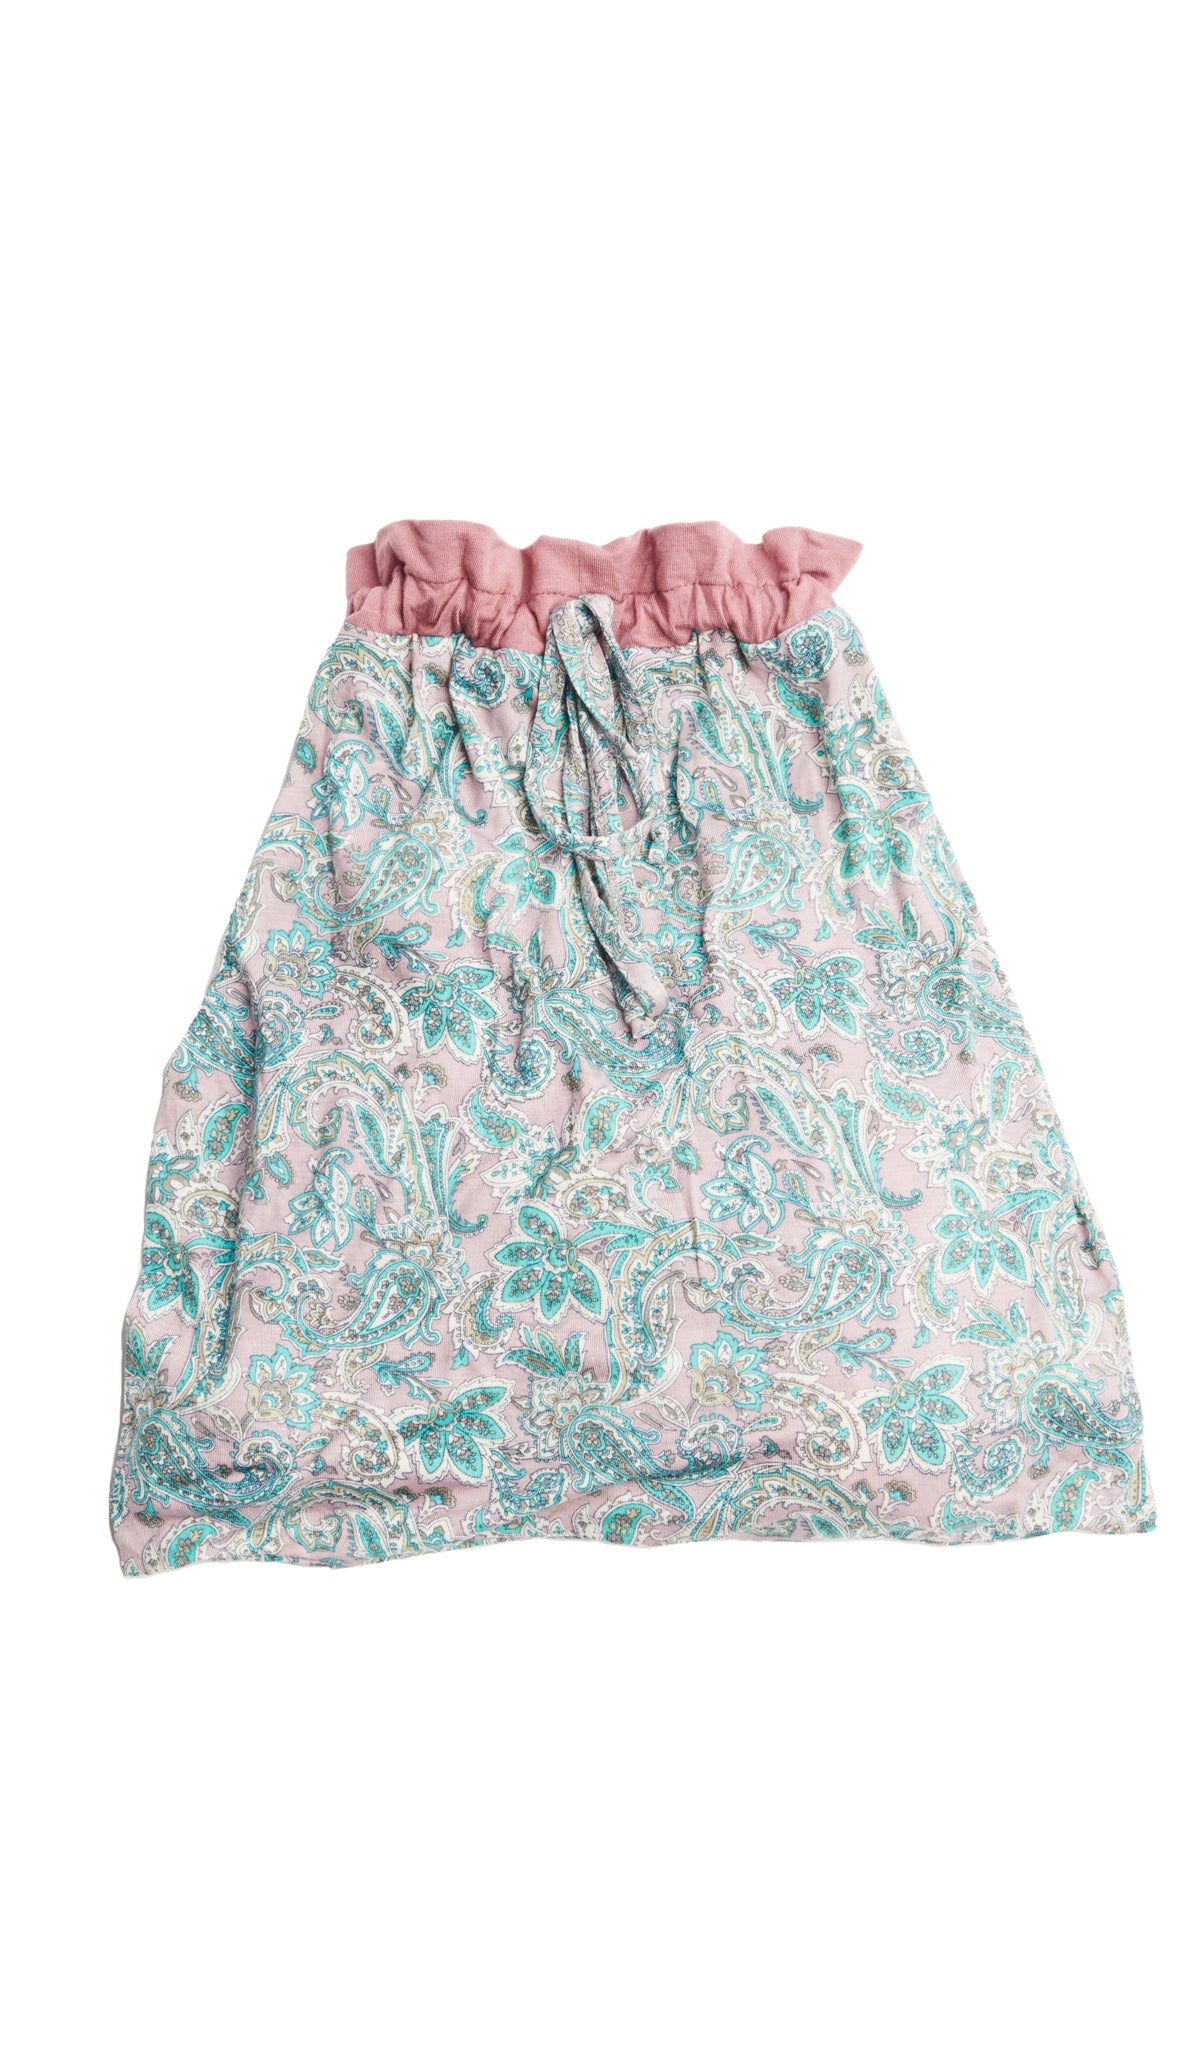 Paisley Dawn Chemise/Robe comes with matching fabric drawstring gift bag.